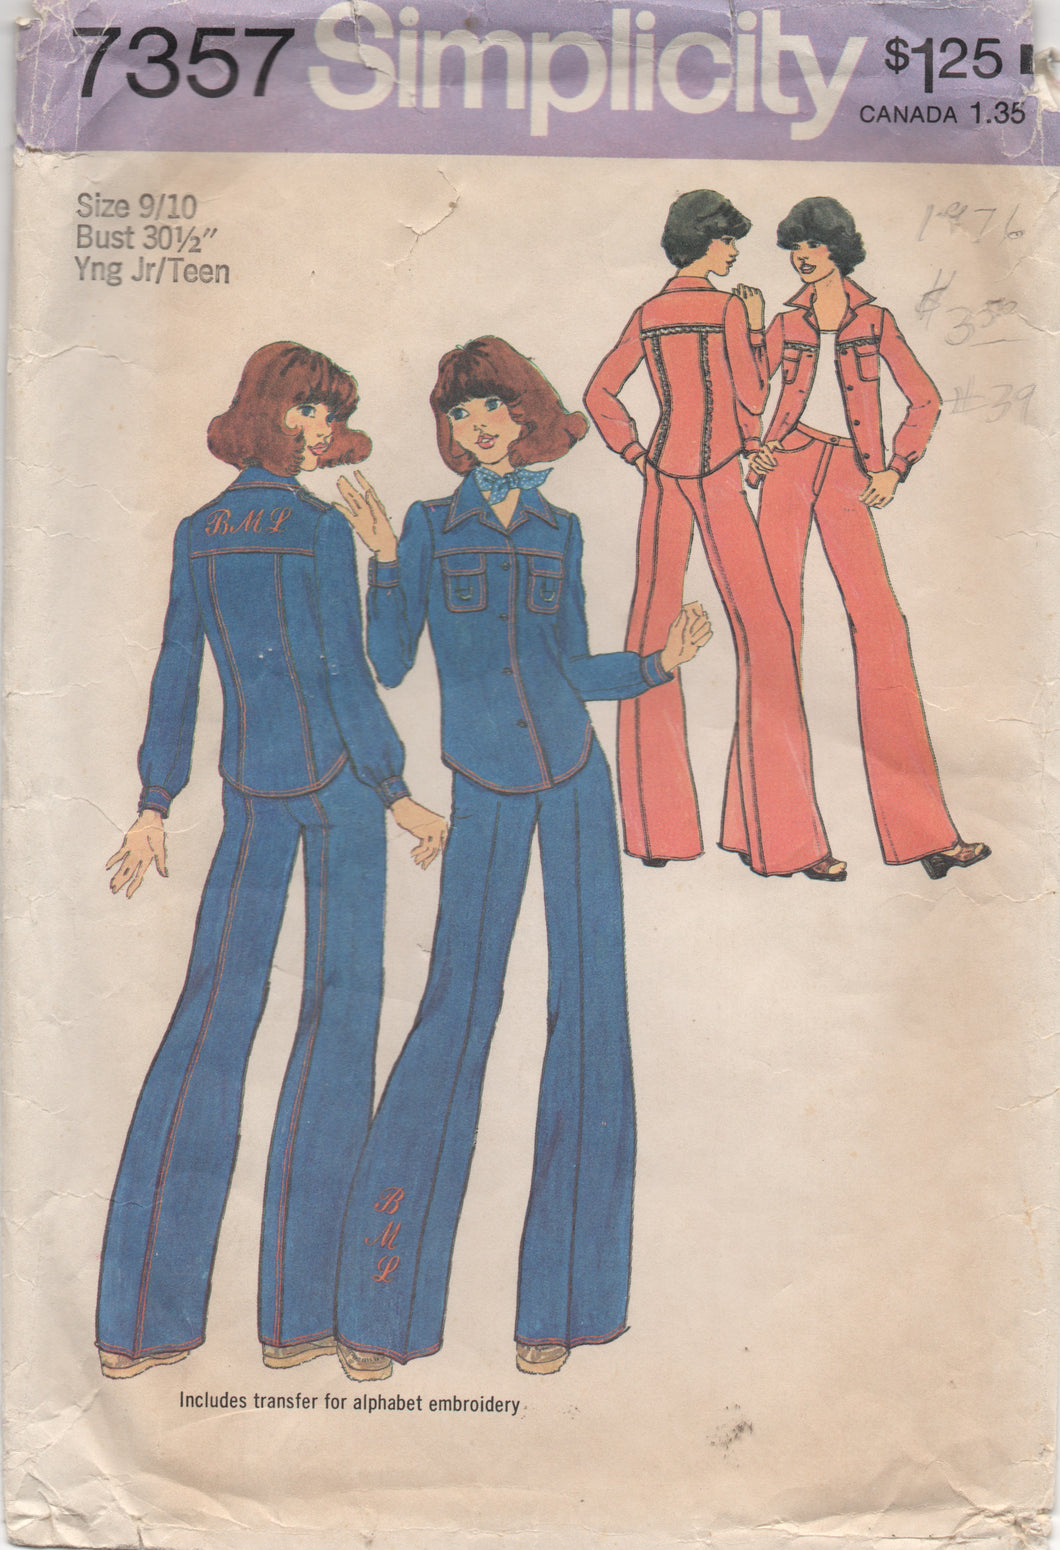 1970's Simplicity Button up Shirt and Wide-Leg Pants - Bust 30.5